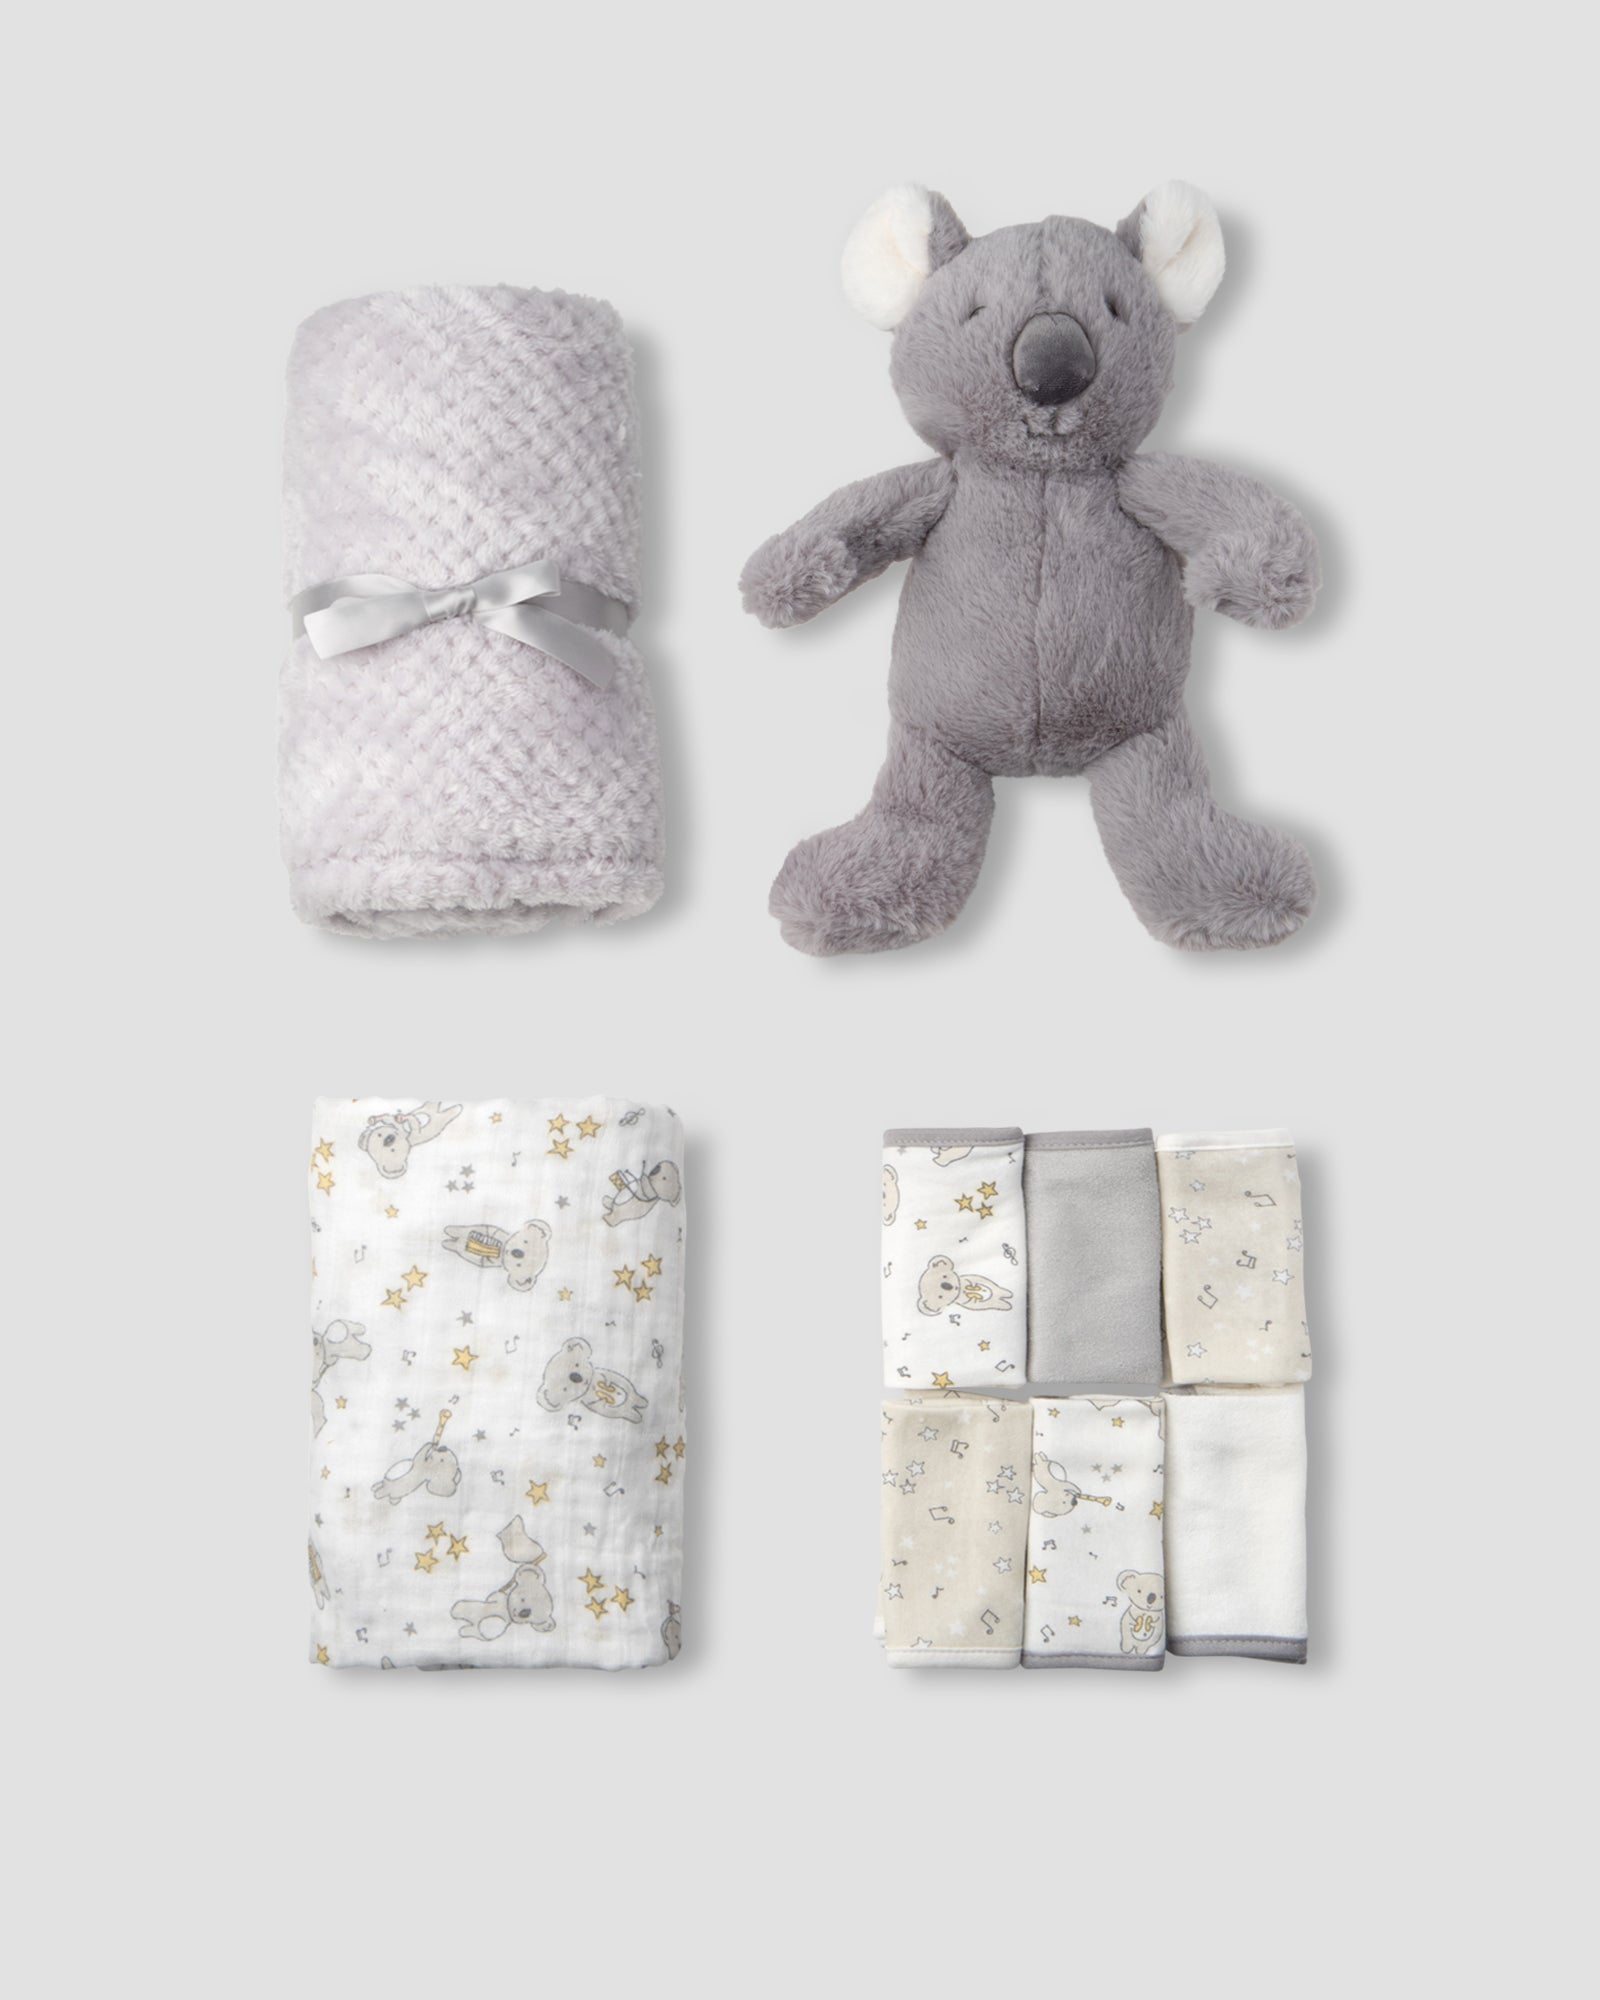 Baby Gift Sets – Little Linen Created